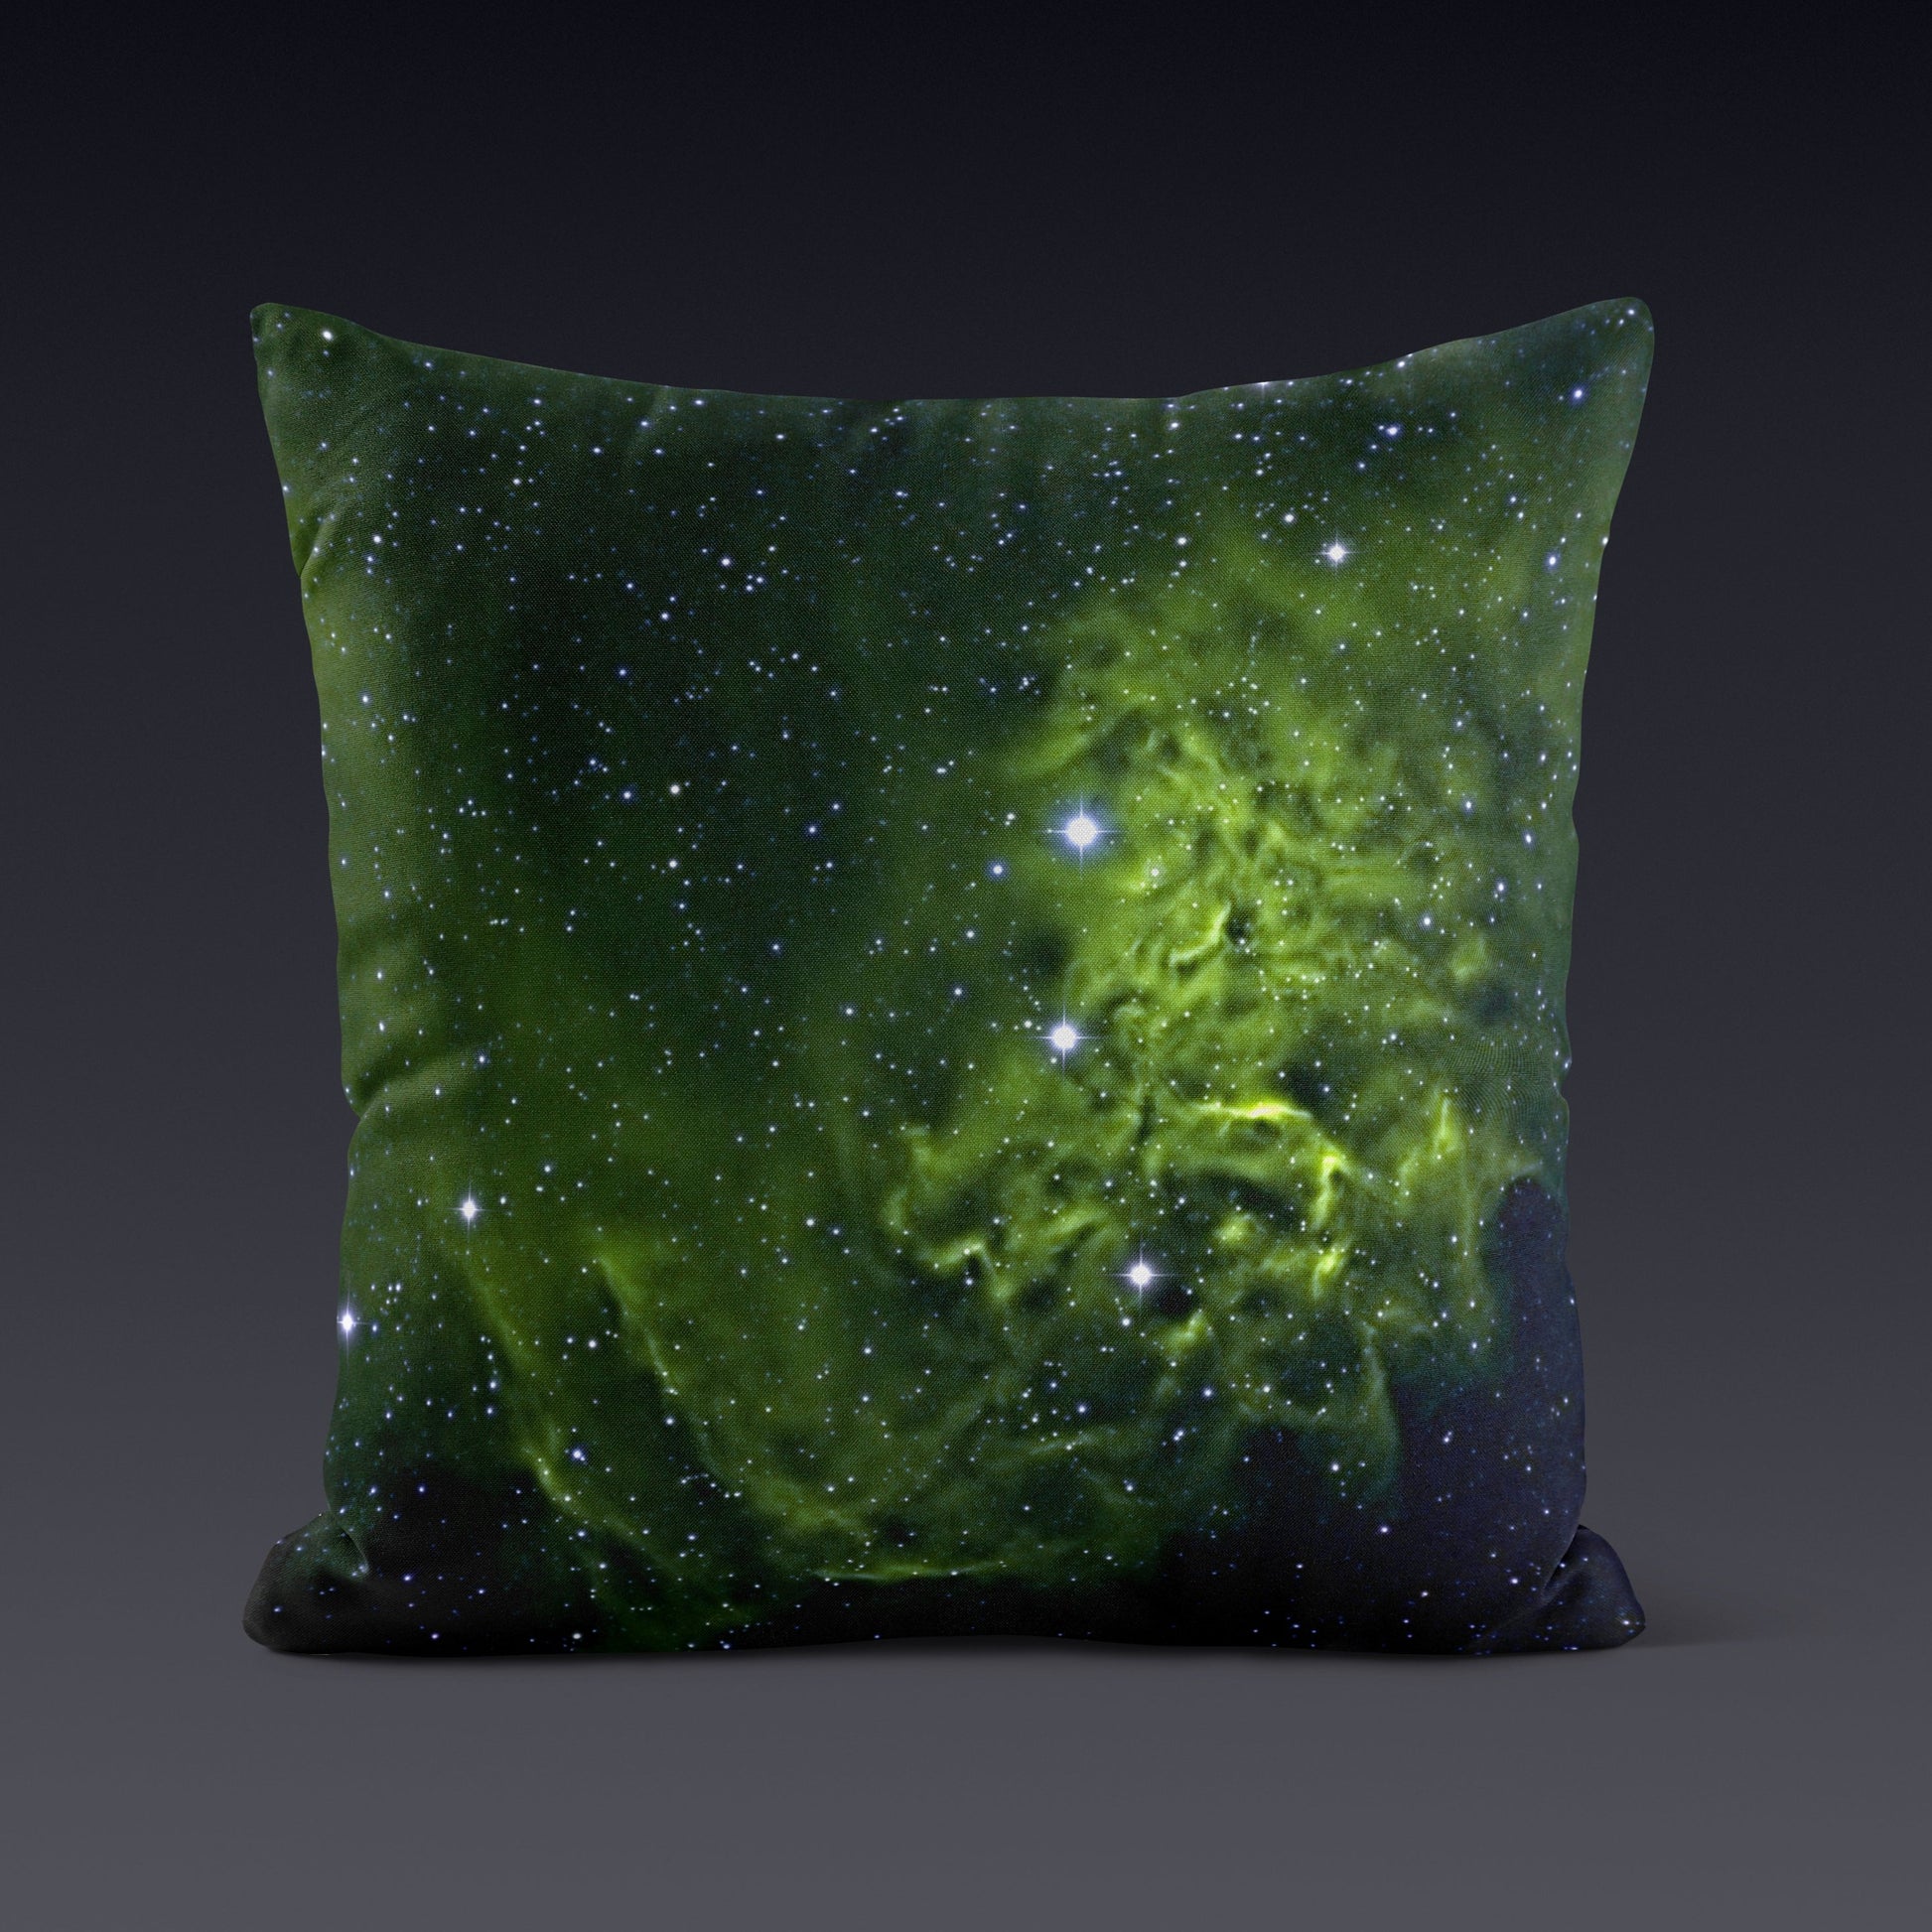 Space Cushion - Flaming Green Star - The Tiny Art Co